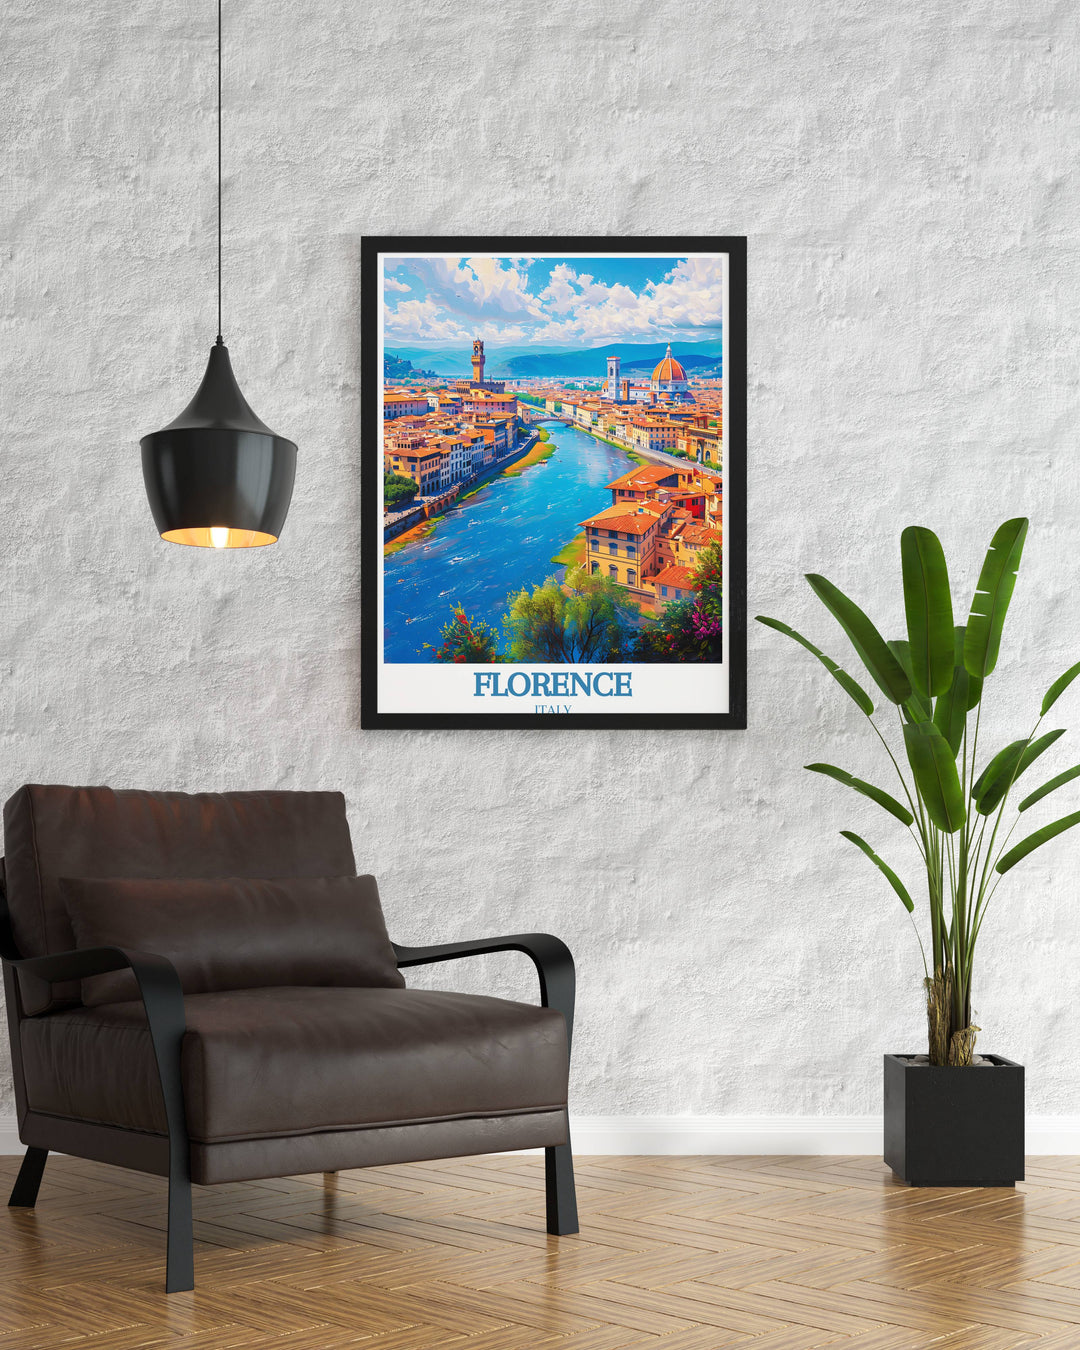 Wall Art capturing the grandiosity of the Uffizi Gallery, inviting viewers to explore the depths of Renaissance art within Florences walls.